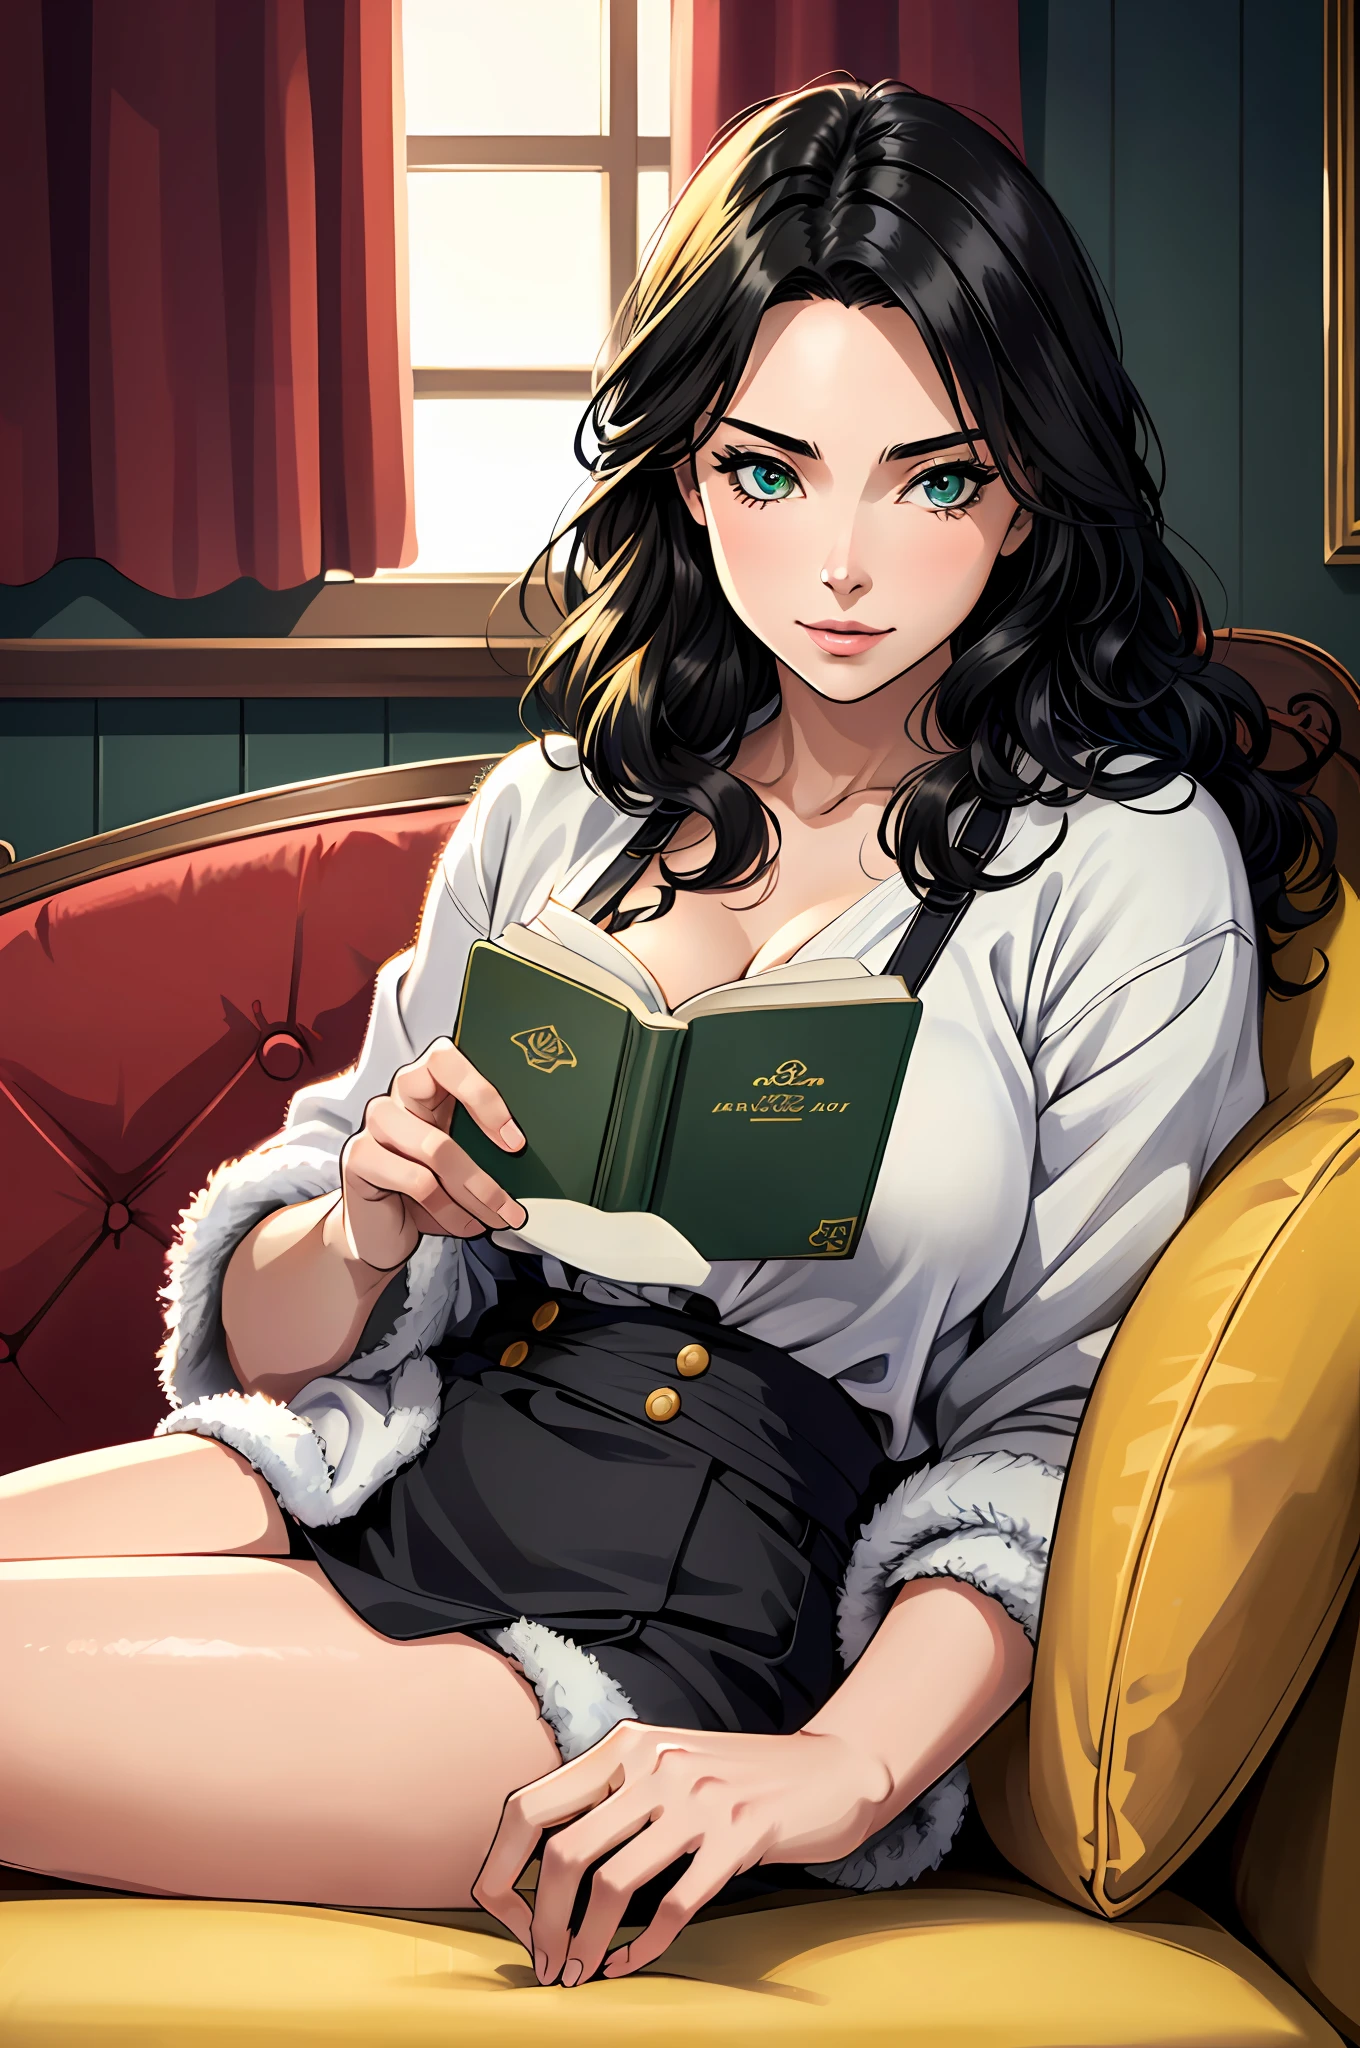 ((((A young woman))), the anime, Green eyes, (black hair), Nice face, ssmile, the perfect body, Wavy Hair, hairlong, (((morena))), big breastes, ((tmasterpiece, beste-Qualit)), illustartion, ультра детализированная 8k, Photorealistic, sharp-focus, higly detailed, Professional lighting, colorful details, Rainbow colors, Glowing, intricate detials, Vivid details, casual wear, Kemi, cozy living room, Sofa, Read the book, soft fluffy slippers on your feet, lying on the couch